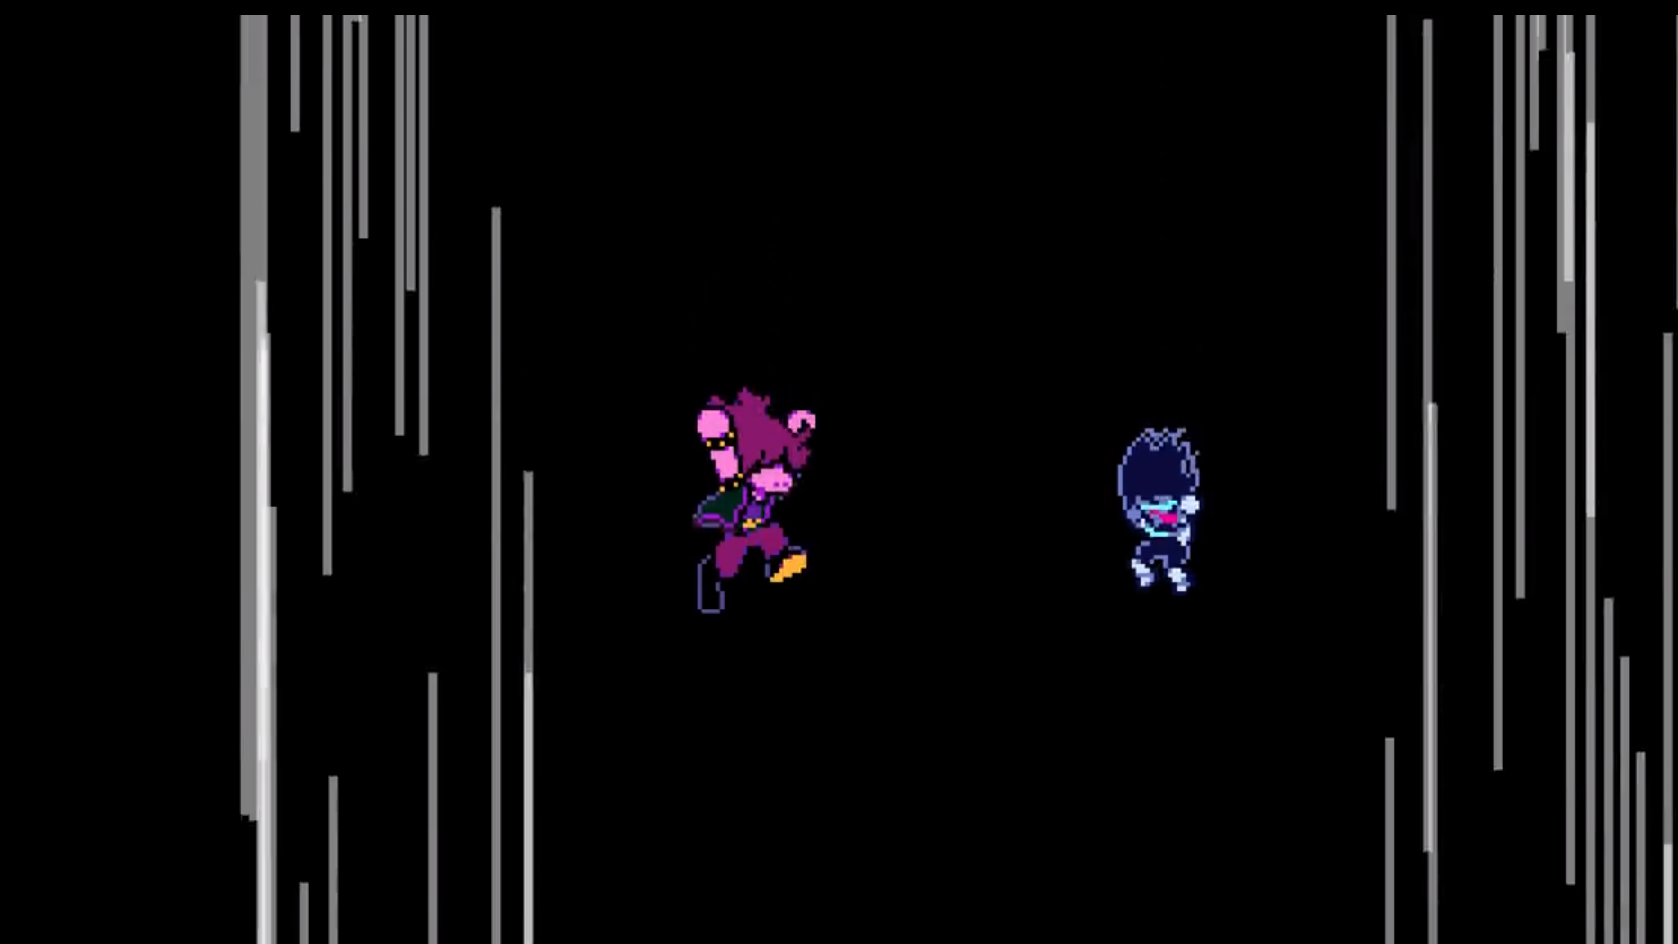 Undertale successor Deltarune Chapter 2 gets a release date and it's